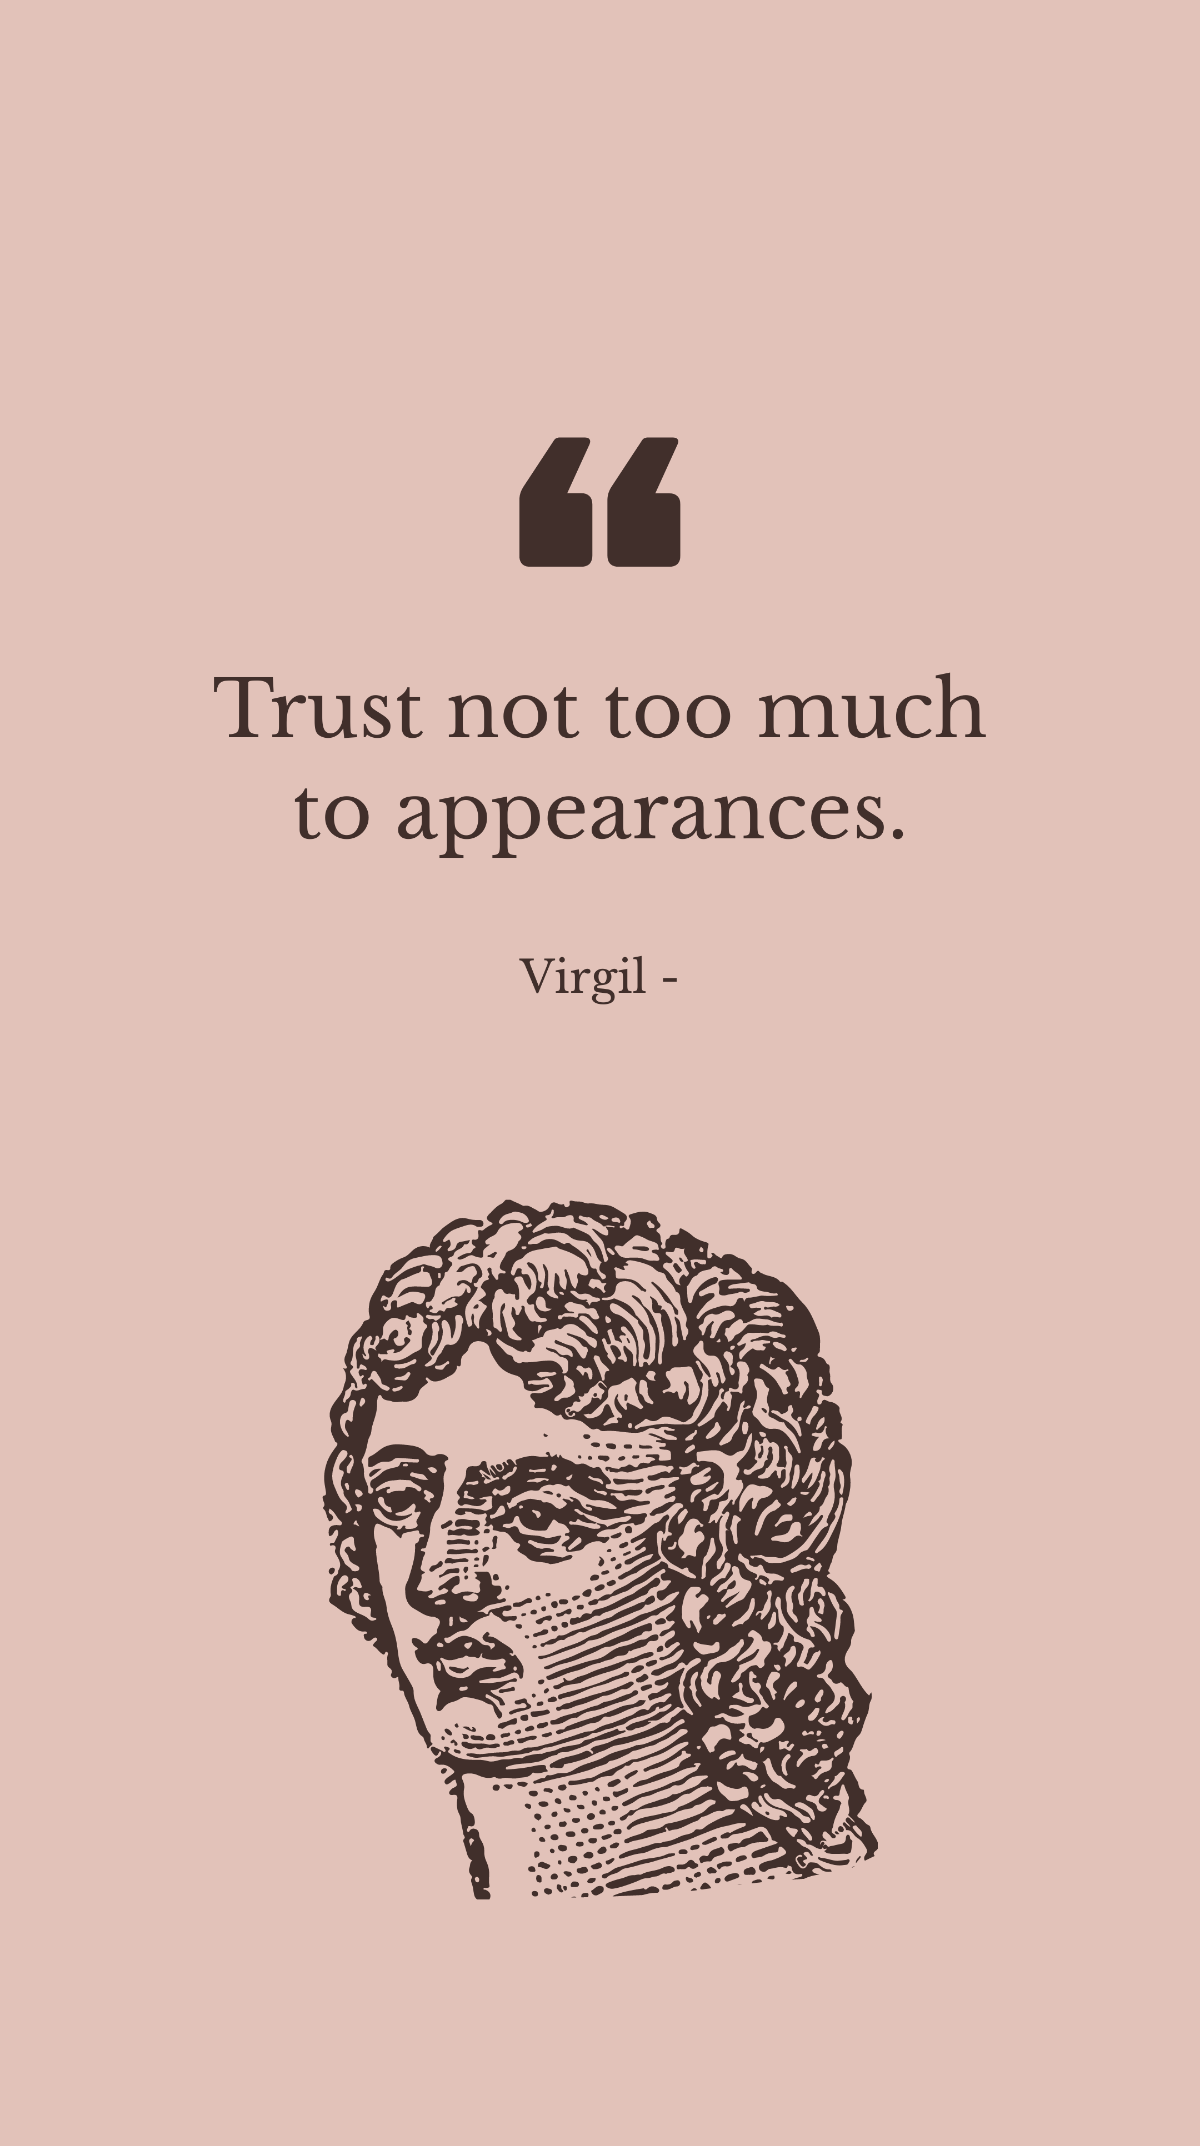 Free Virgil - Trust not too much to appearances. Template